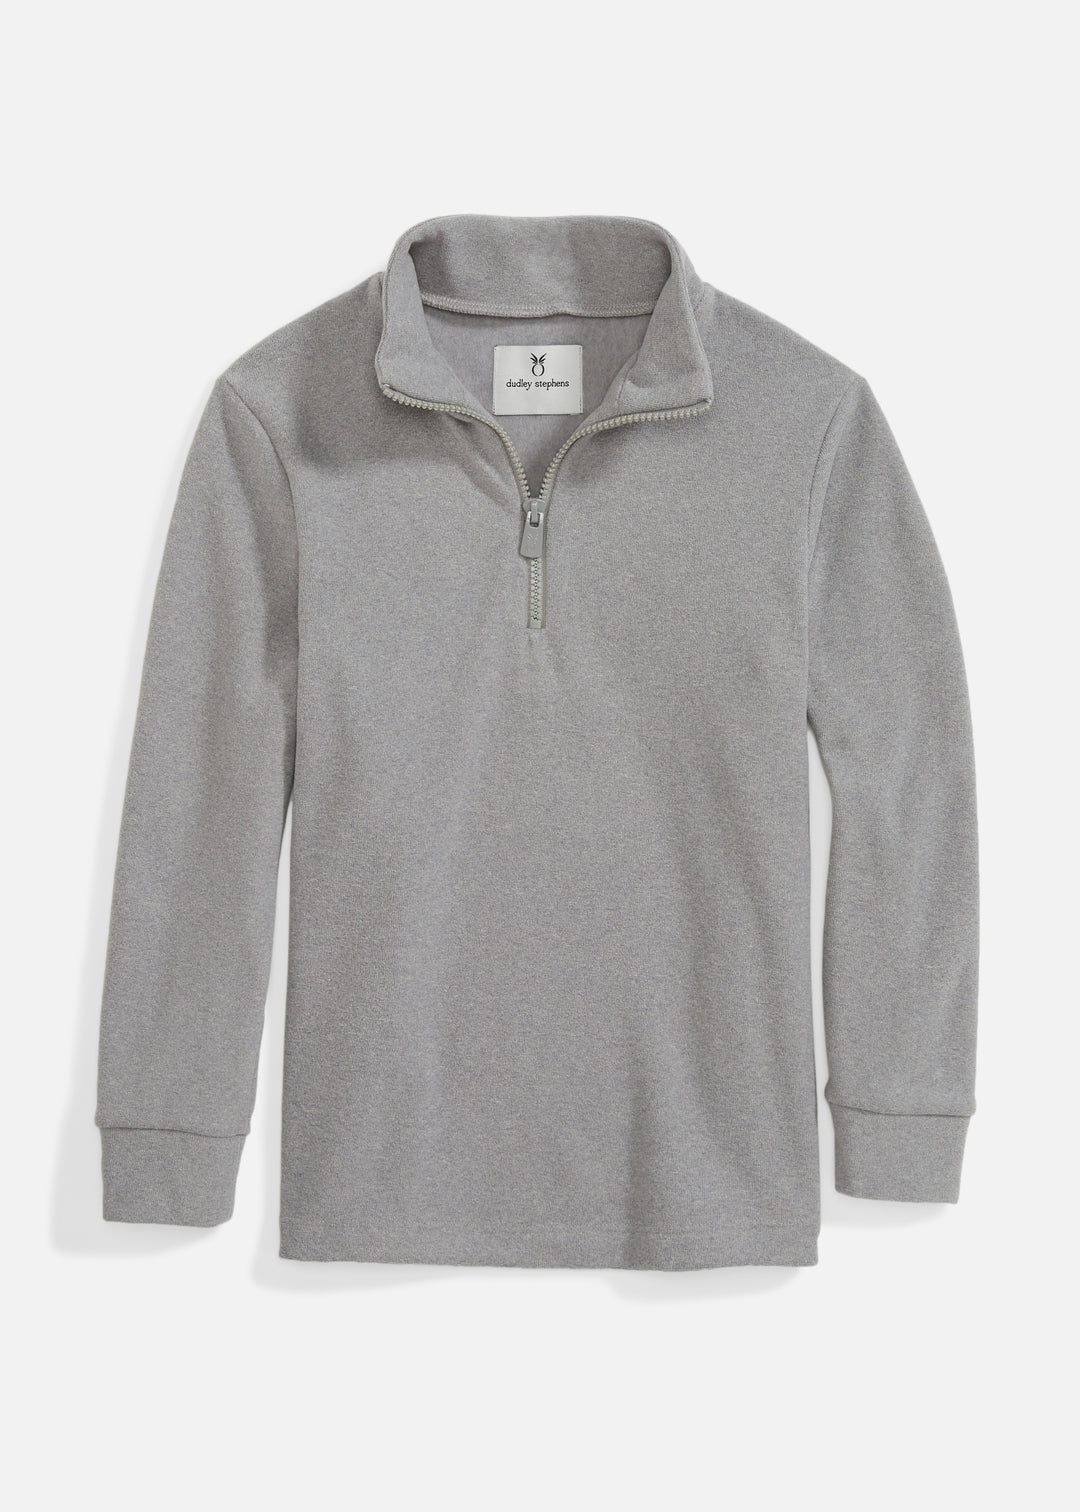 Kids Windabout Pullover in Terry Fleece (Heather Grey)